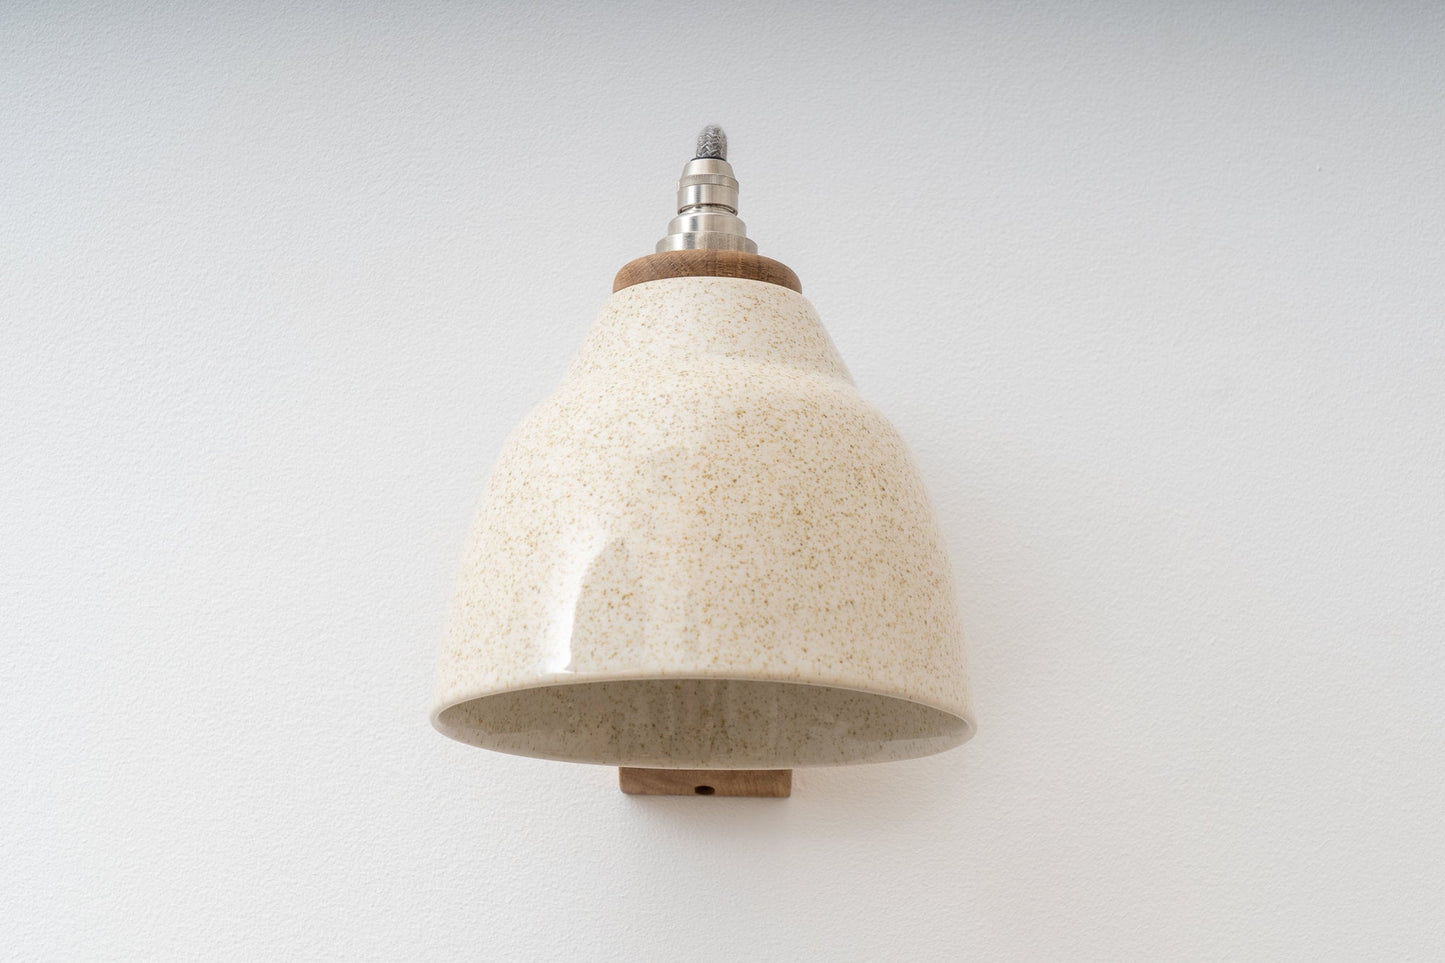 Speckled Cream Gloss Right-Angle Element Wall Light in Ceramic and Oak